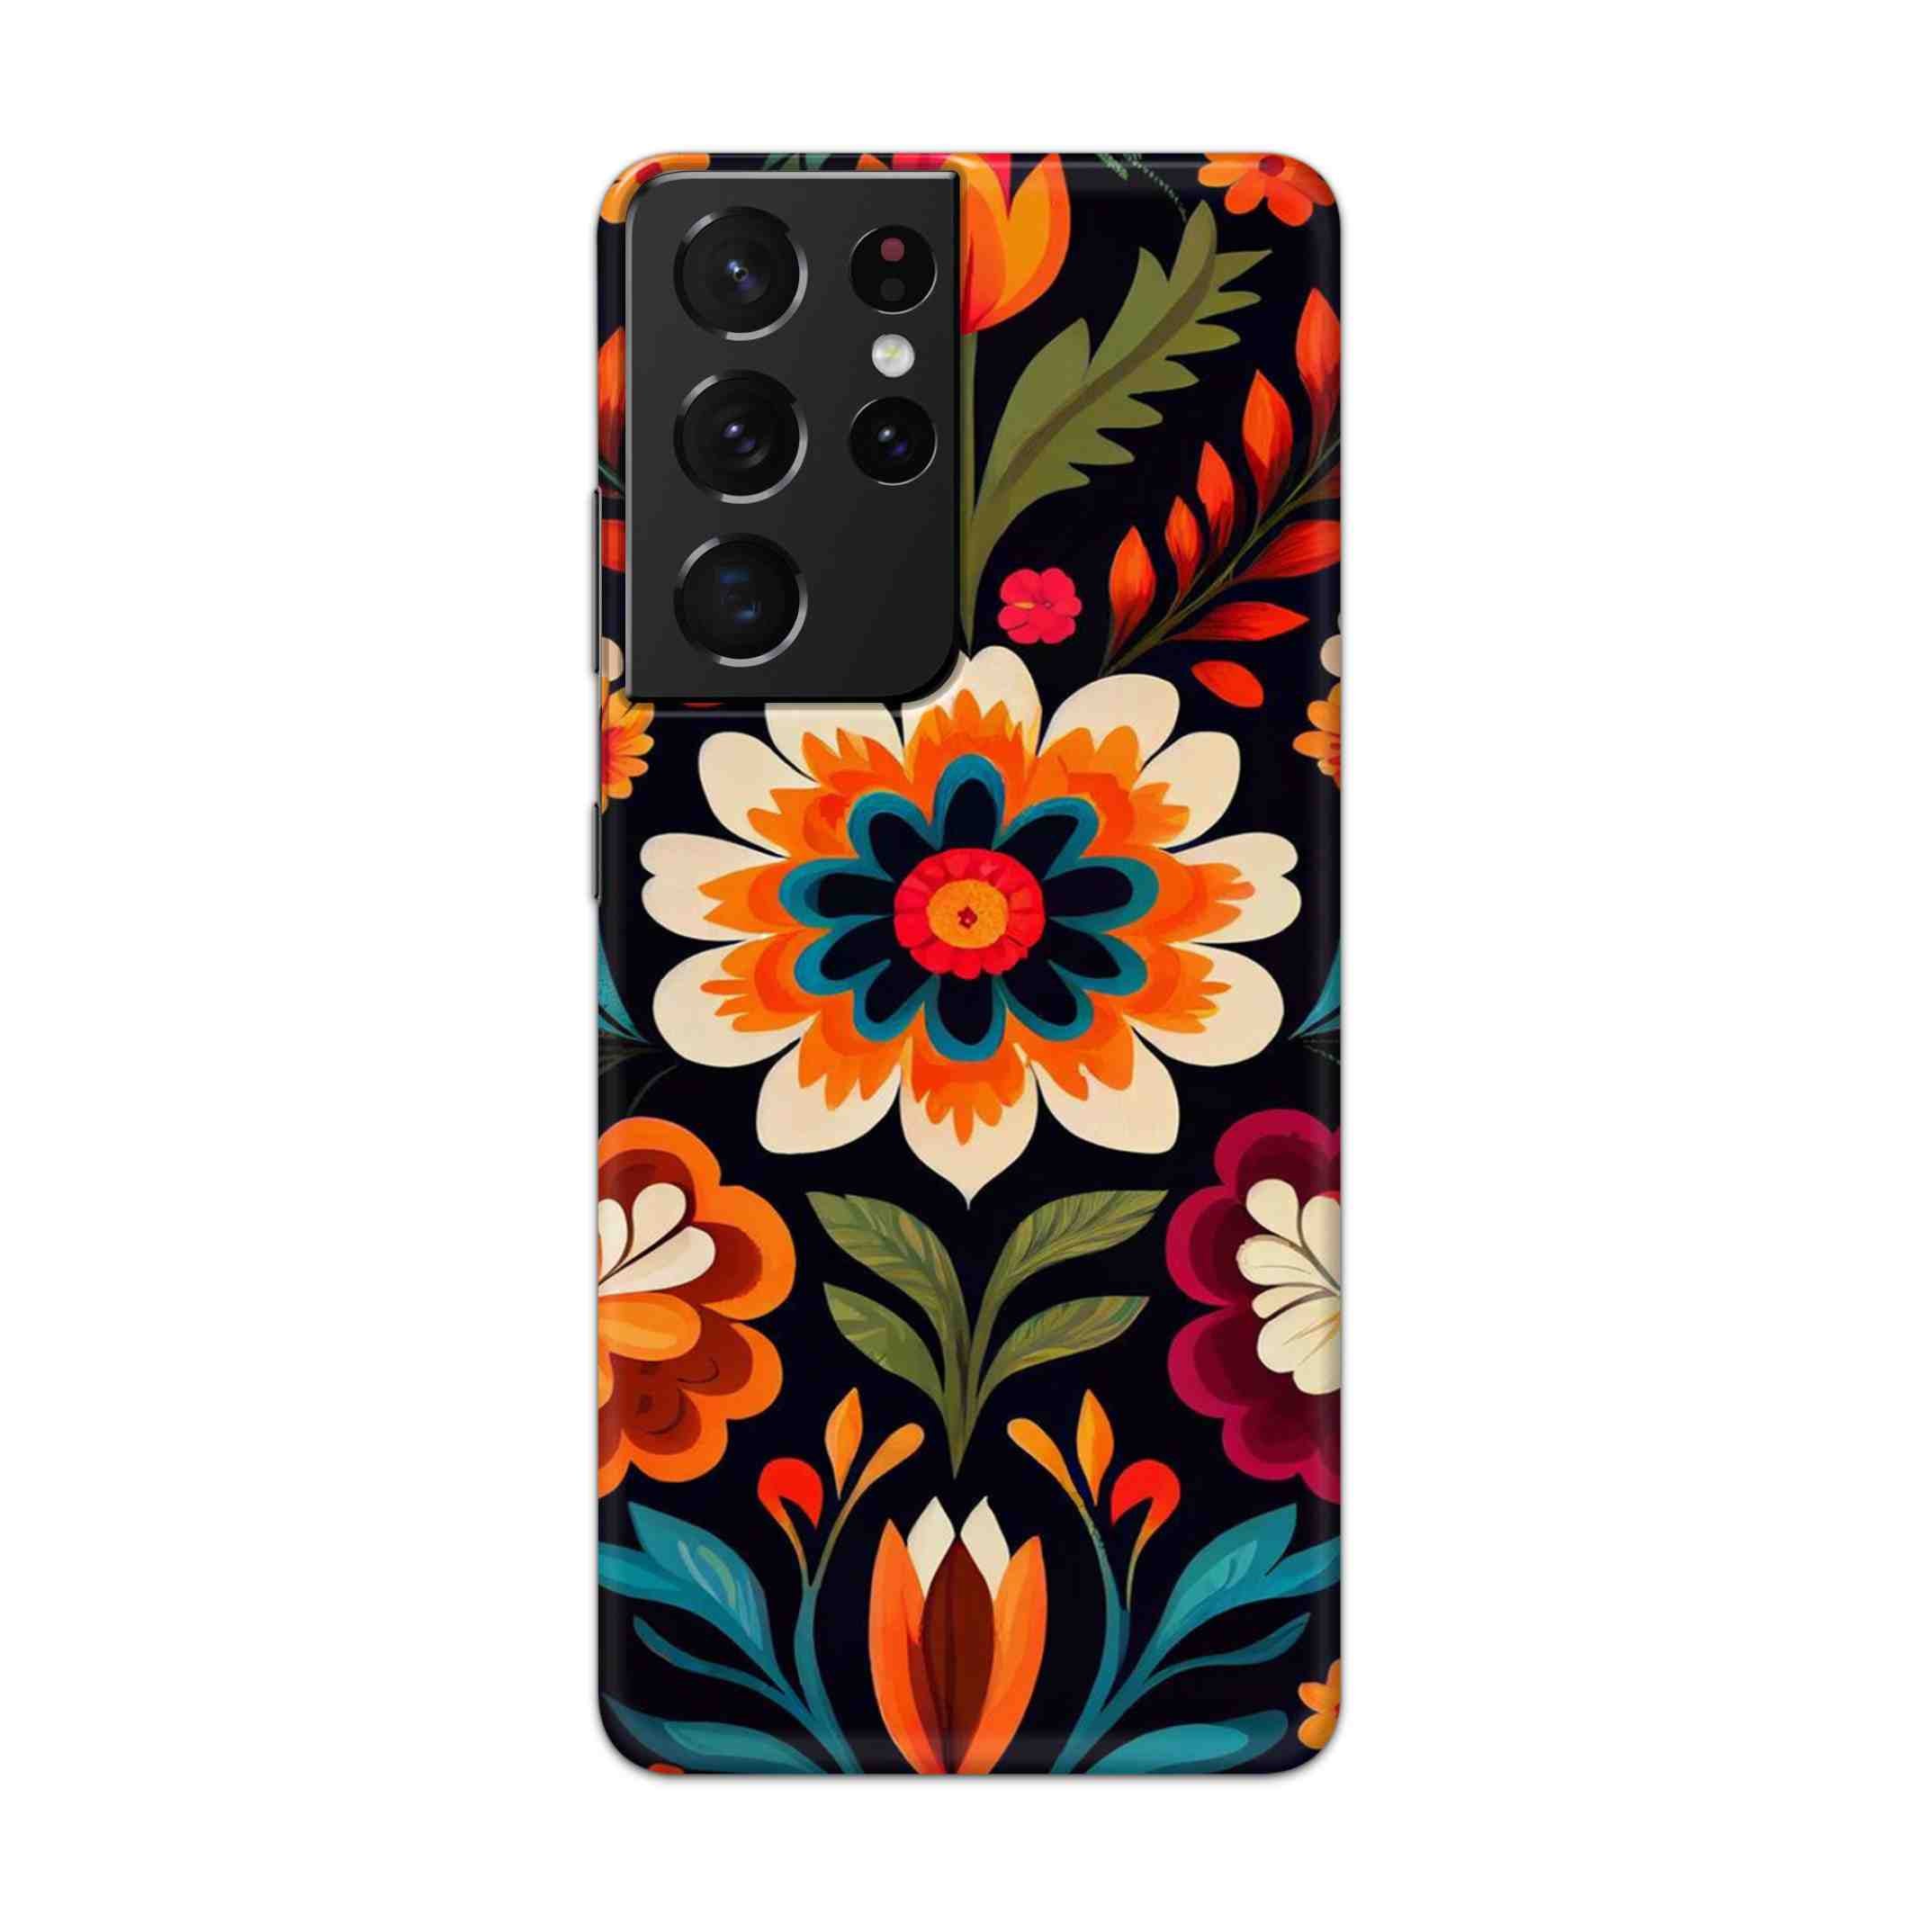 Buy Flower Hard Back Mobile Phone Case Cover For Samsung Galaxy S21 Ultra Online